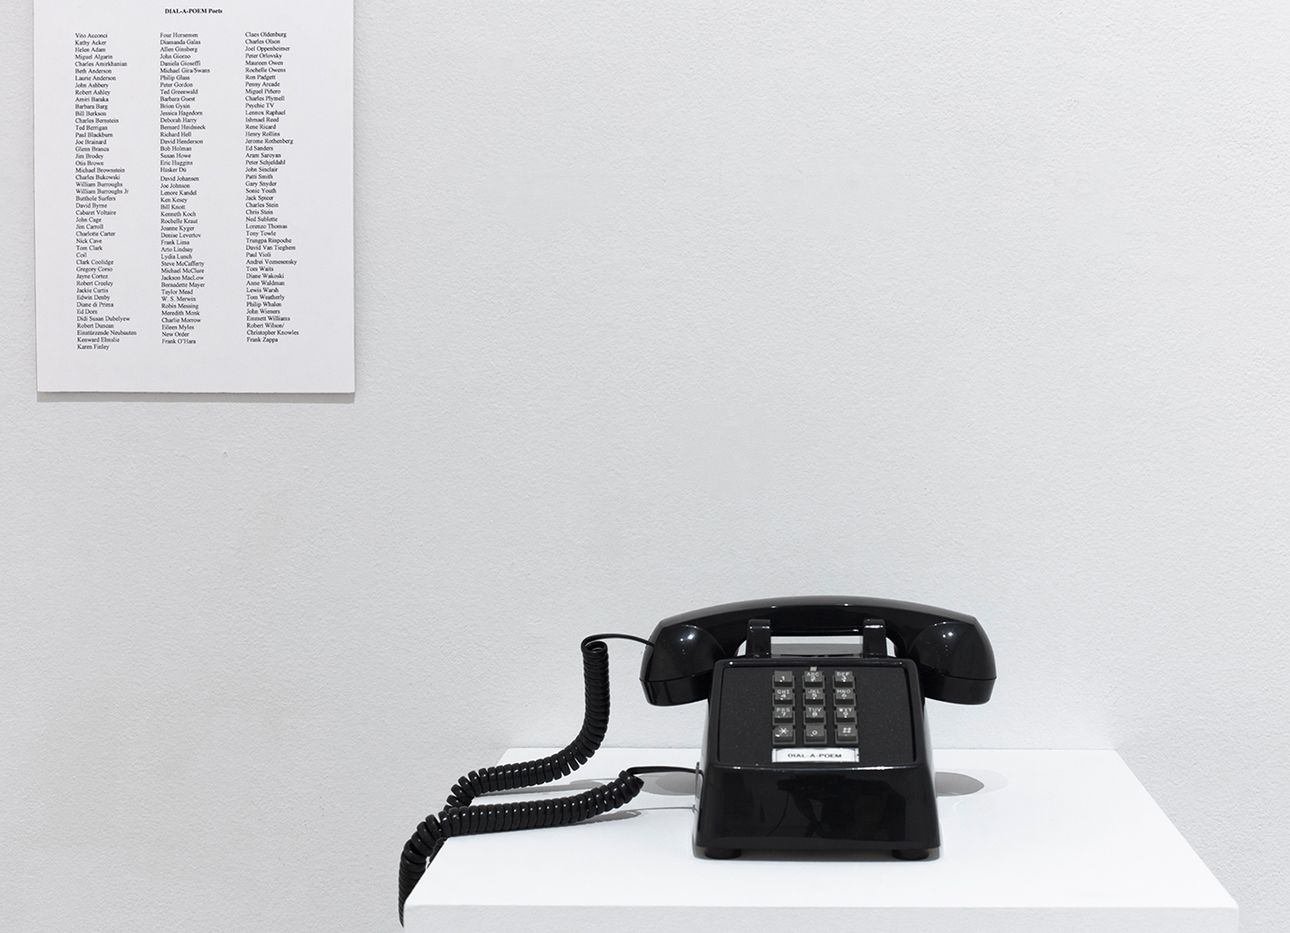 Giorno's Dial-a-Poem phone in a white gallery setting.